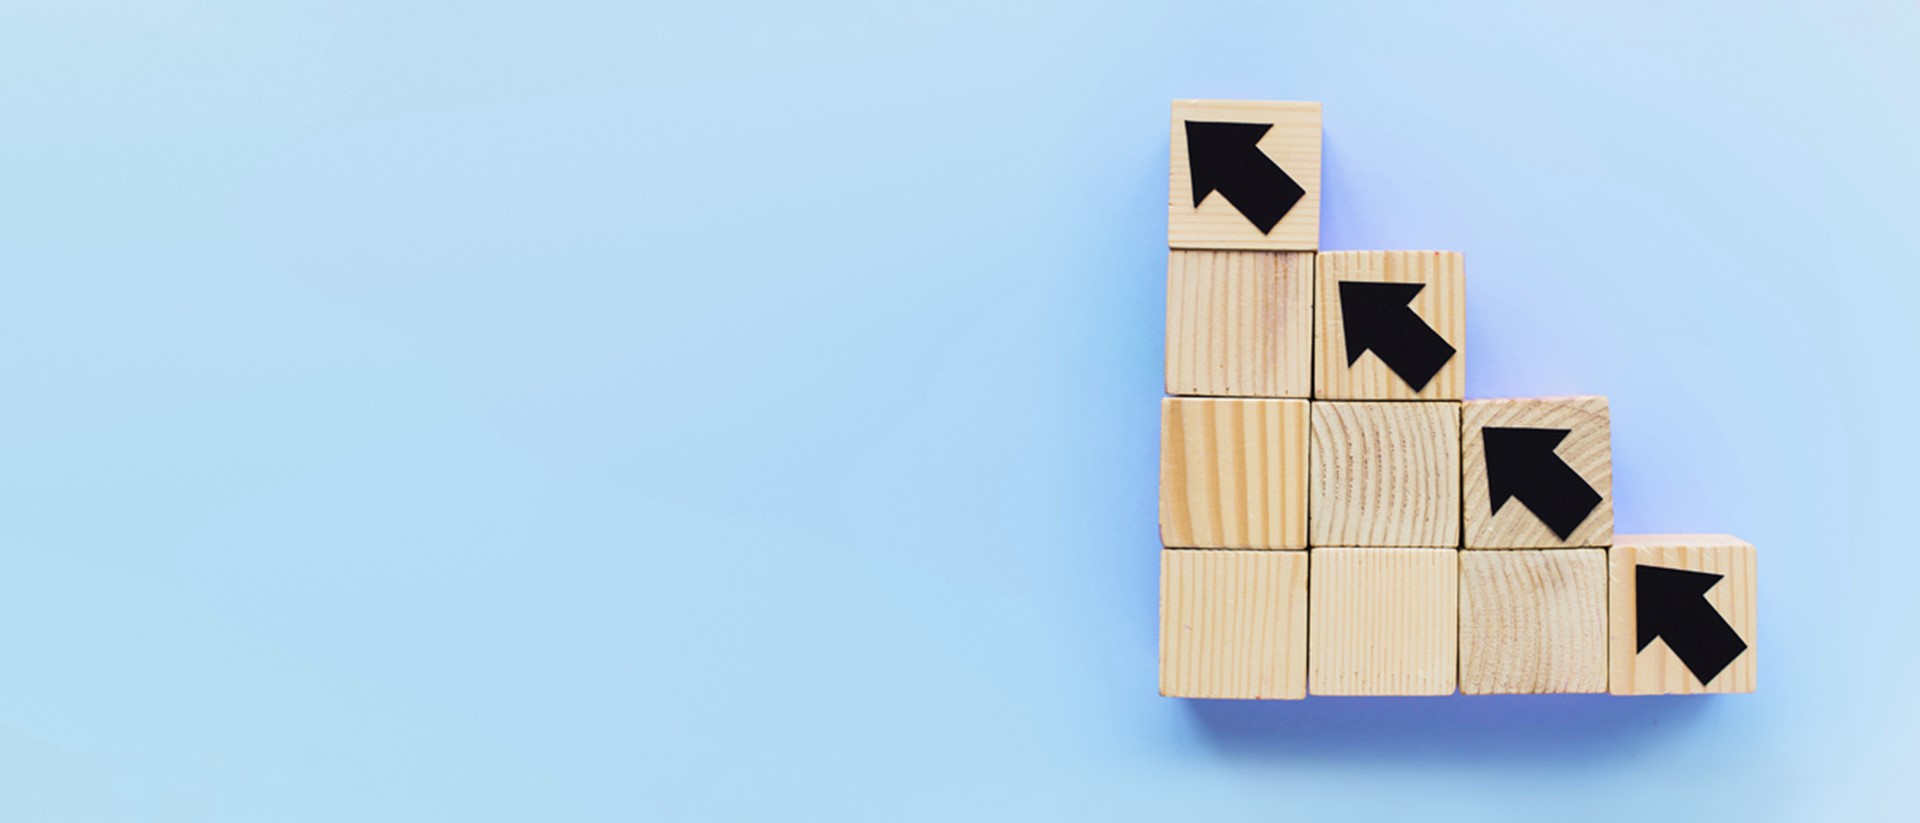 Image of wooden blocks going diagonally against a blue background